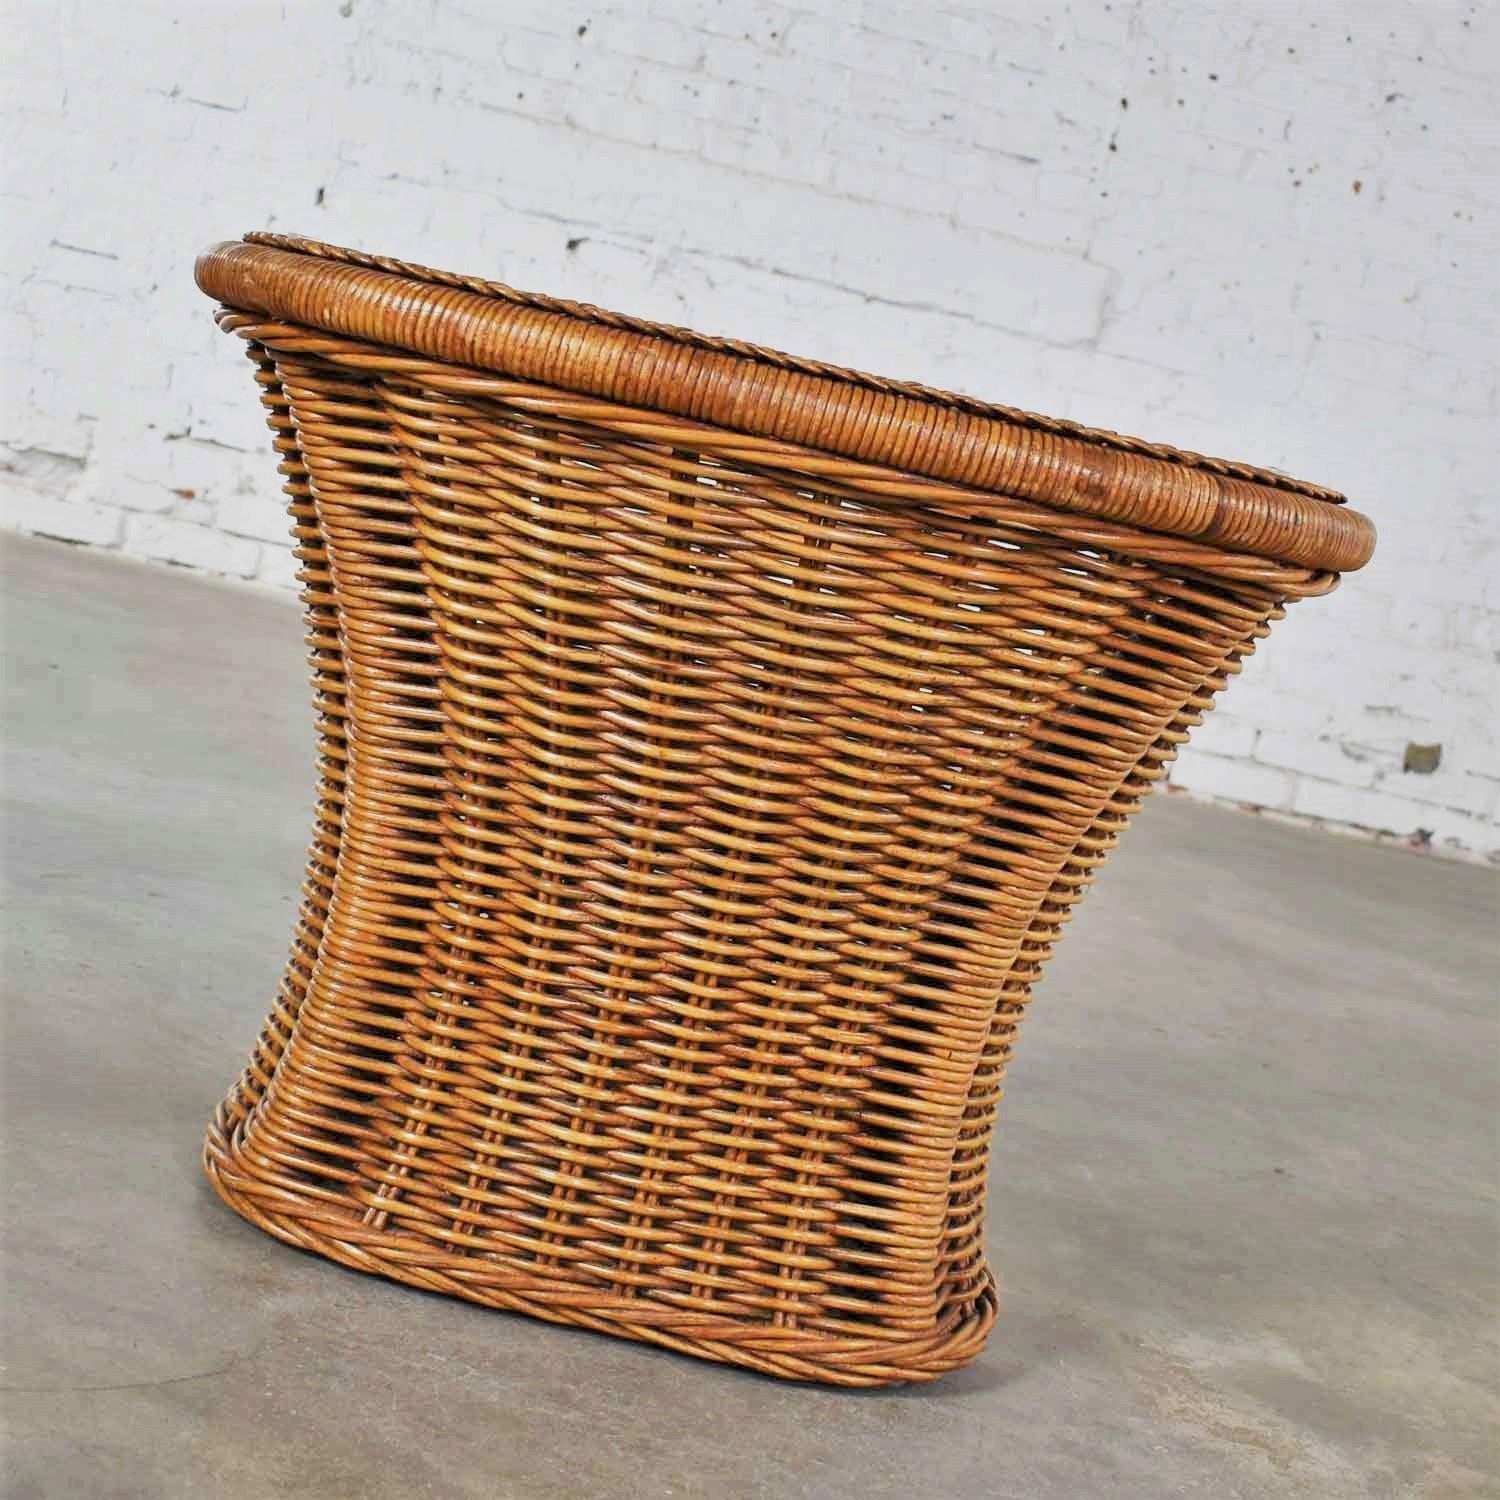 Organic Modern Woven Wicker Rattan Side or End Table with Rectangular Glass For Sale 5